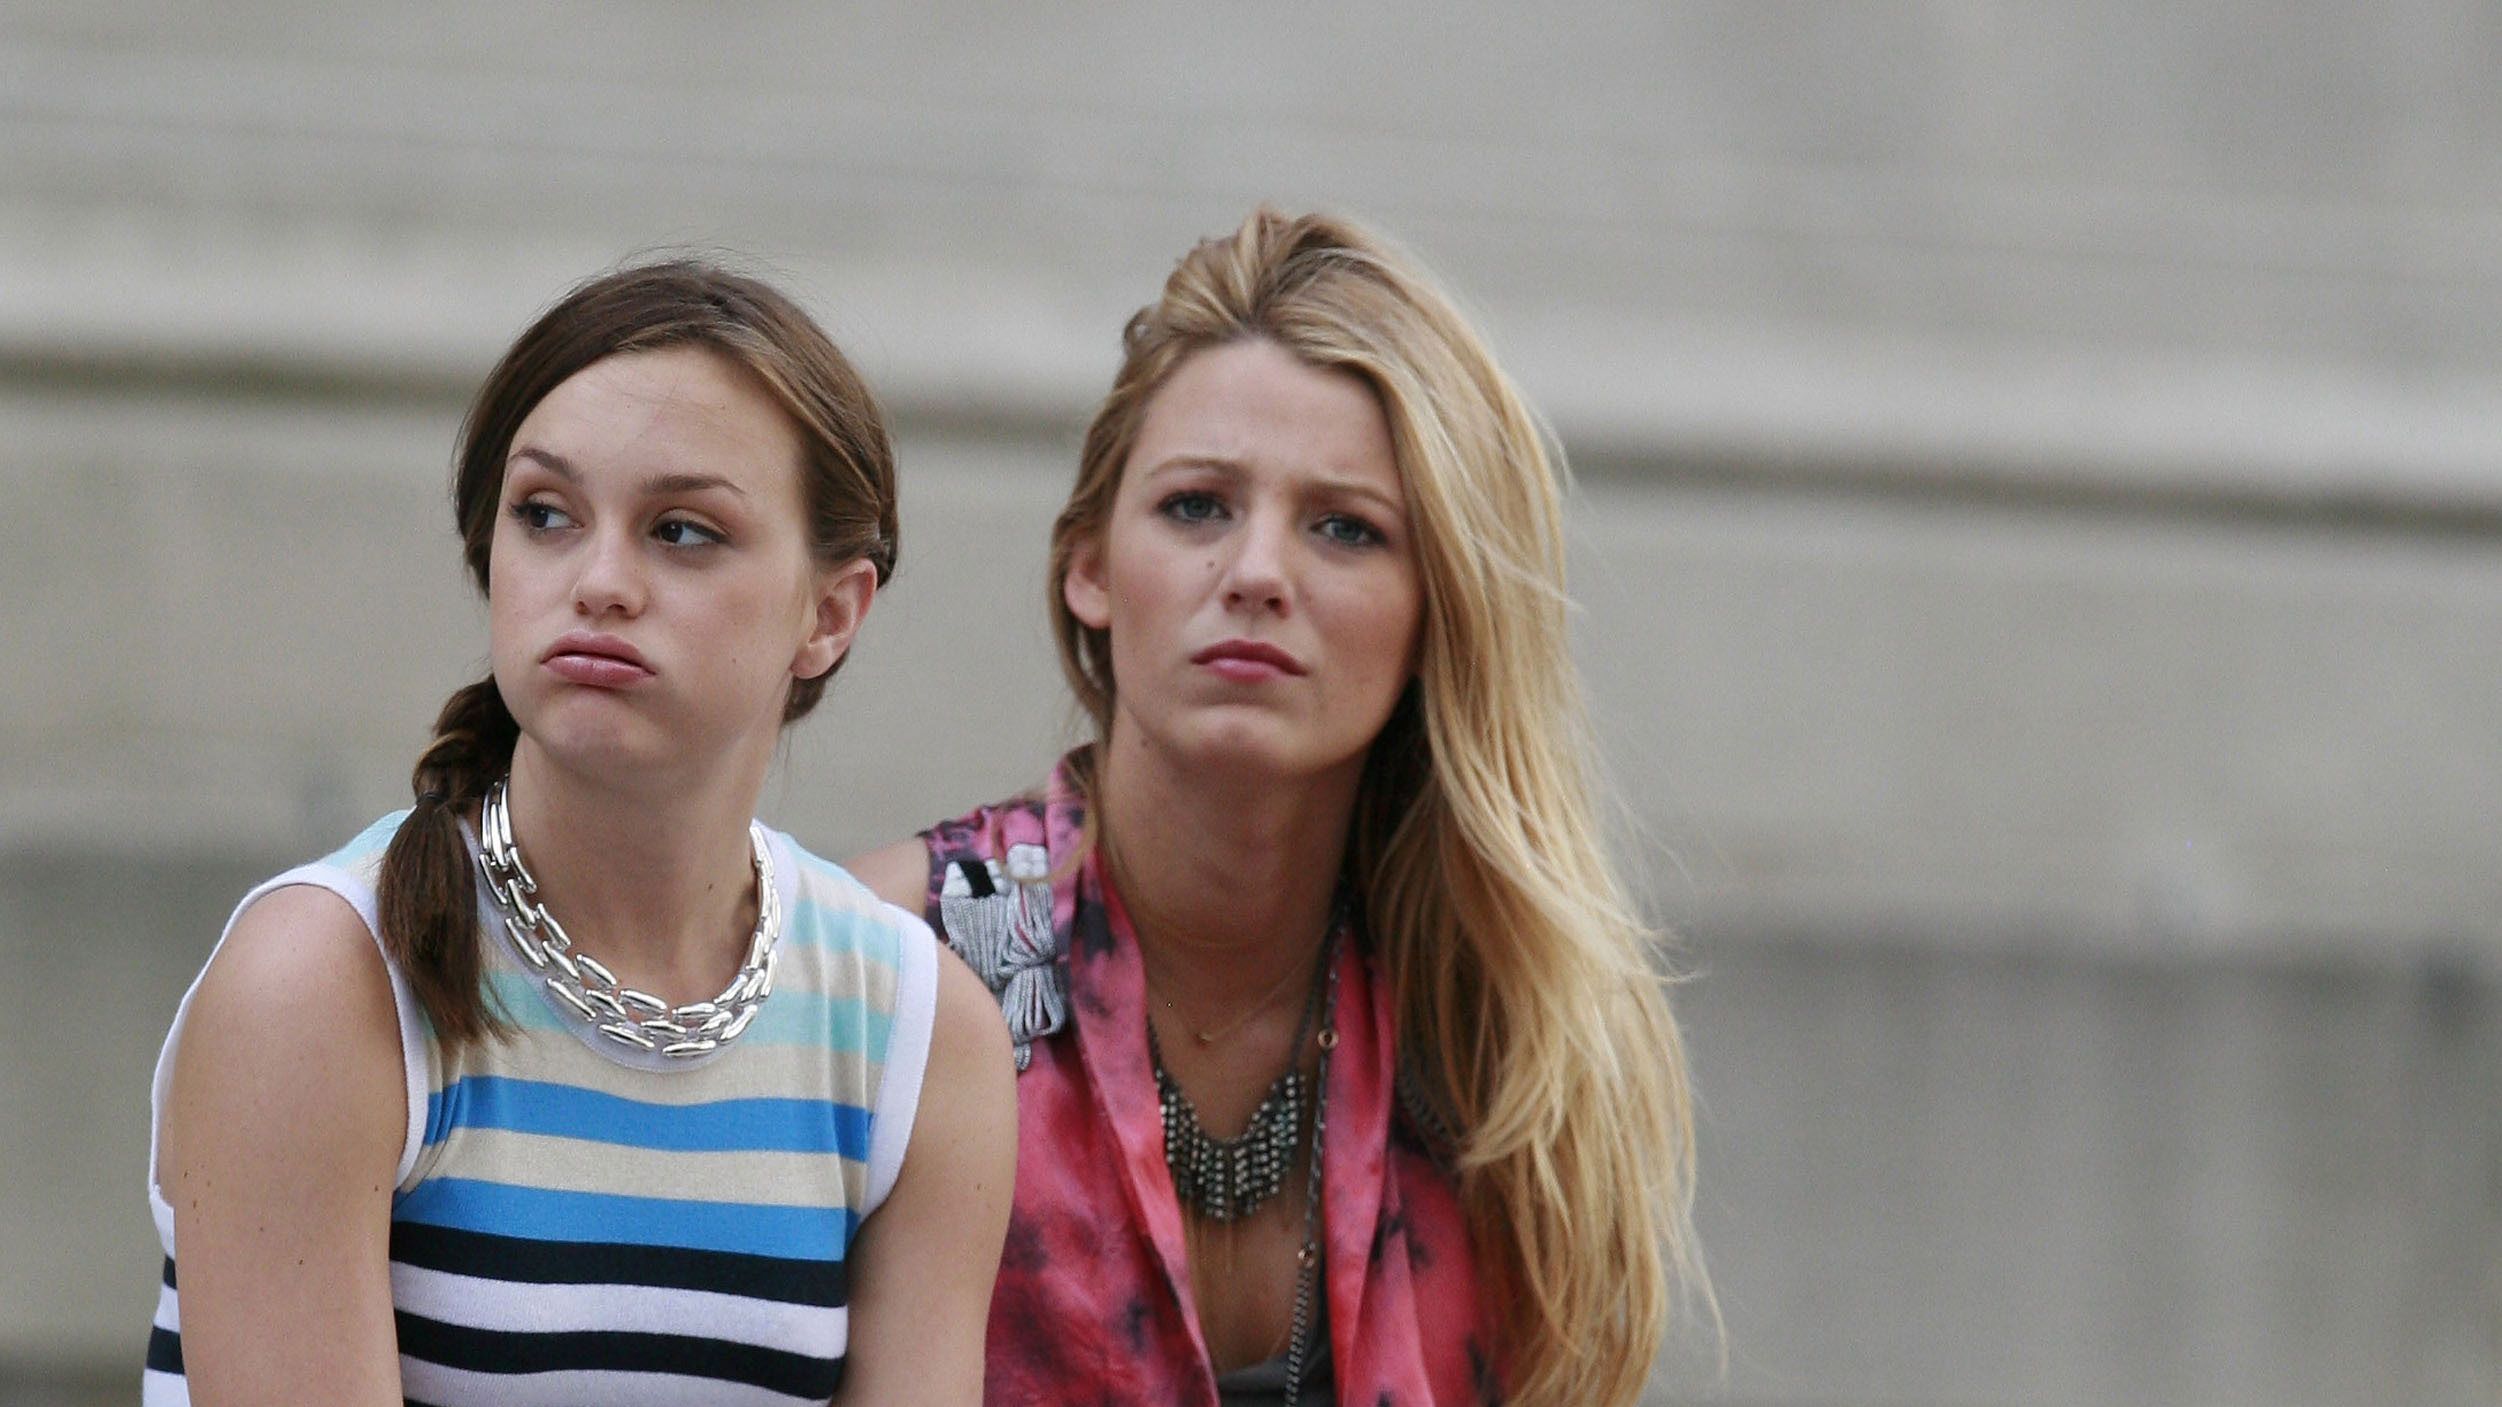 Fans Spot 'Gossip Girl' Editing Error Involving Blake Lively's Outfit